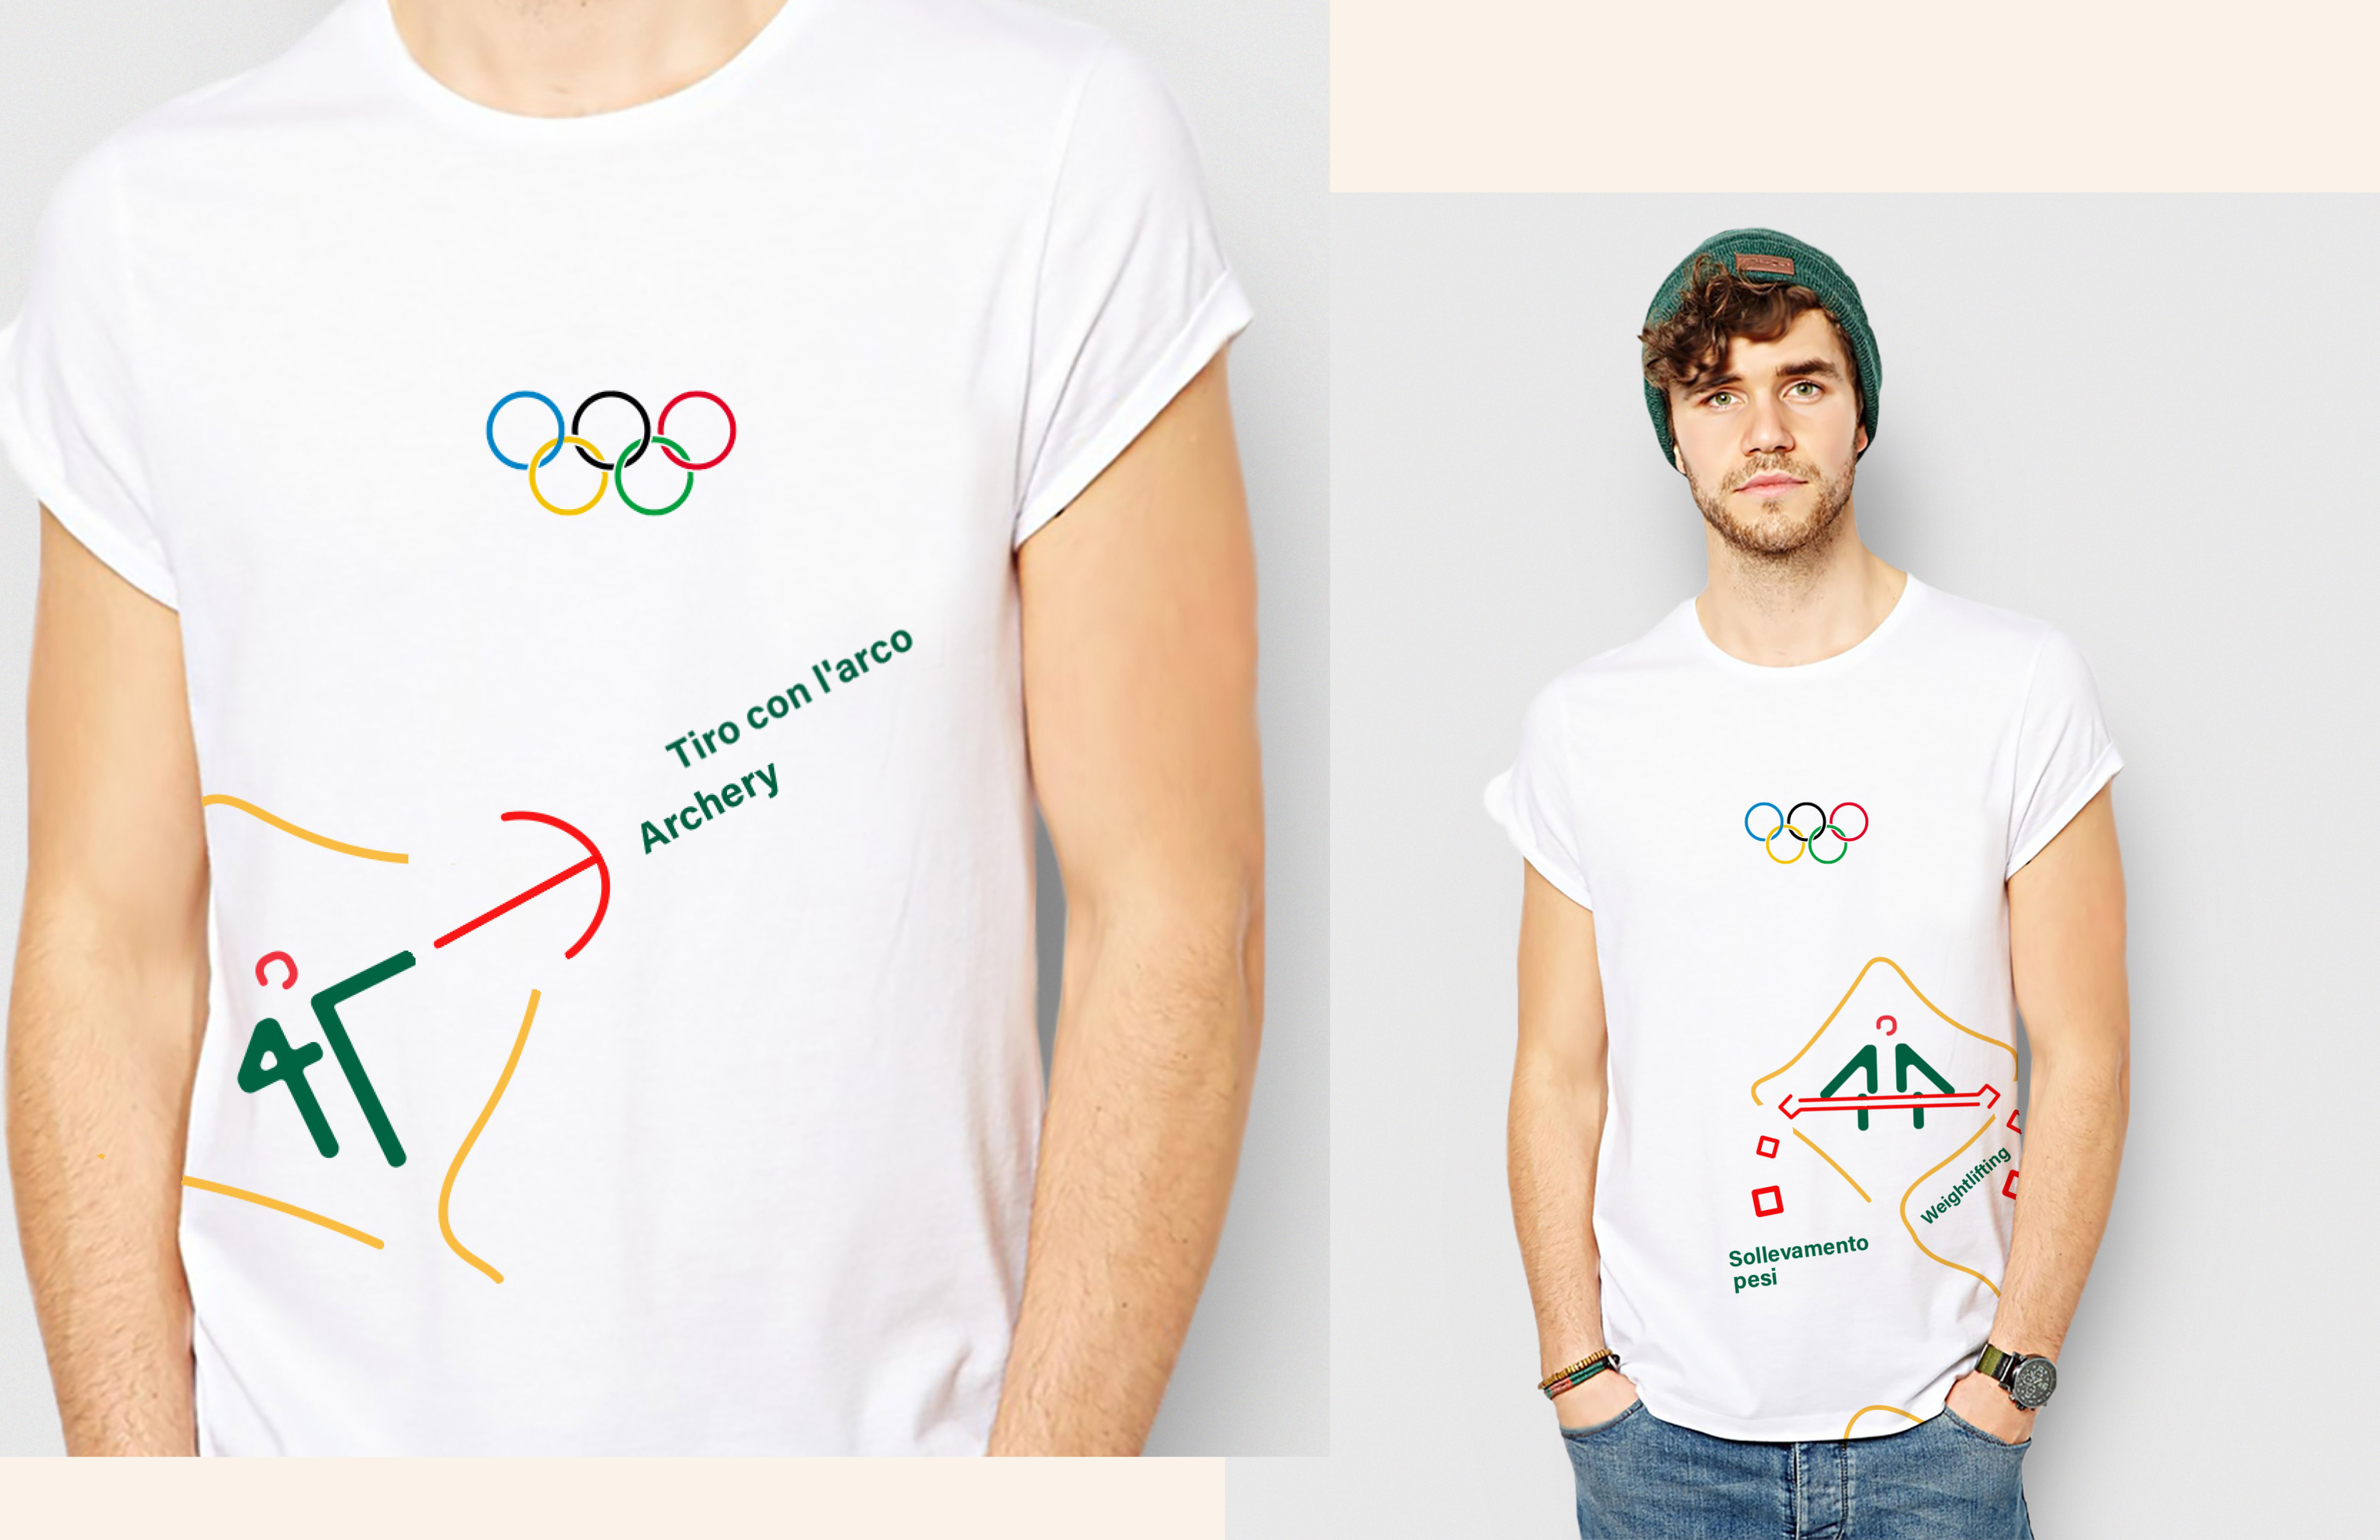 Olympic Pictograms System Design